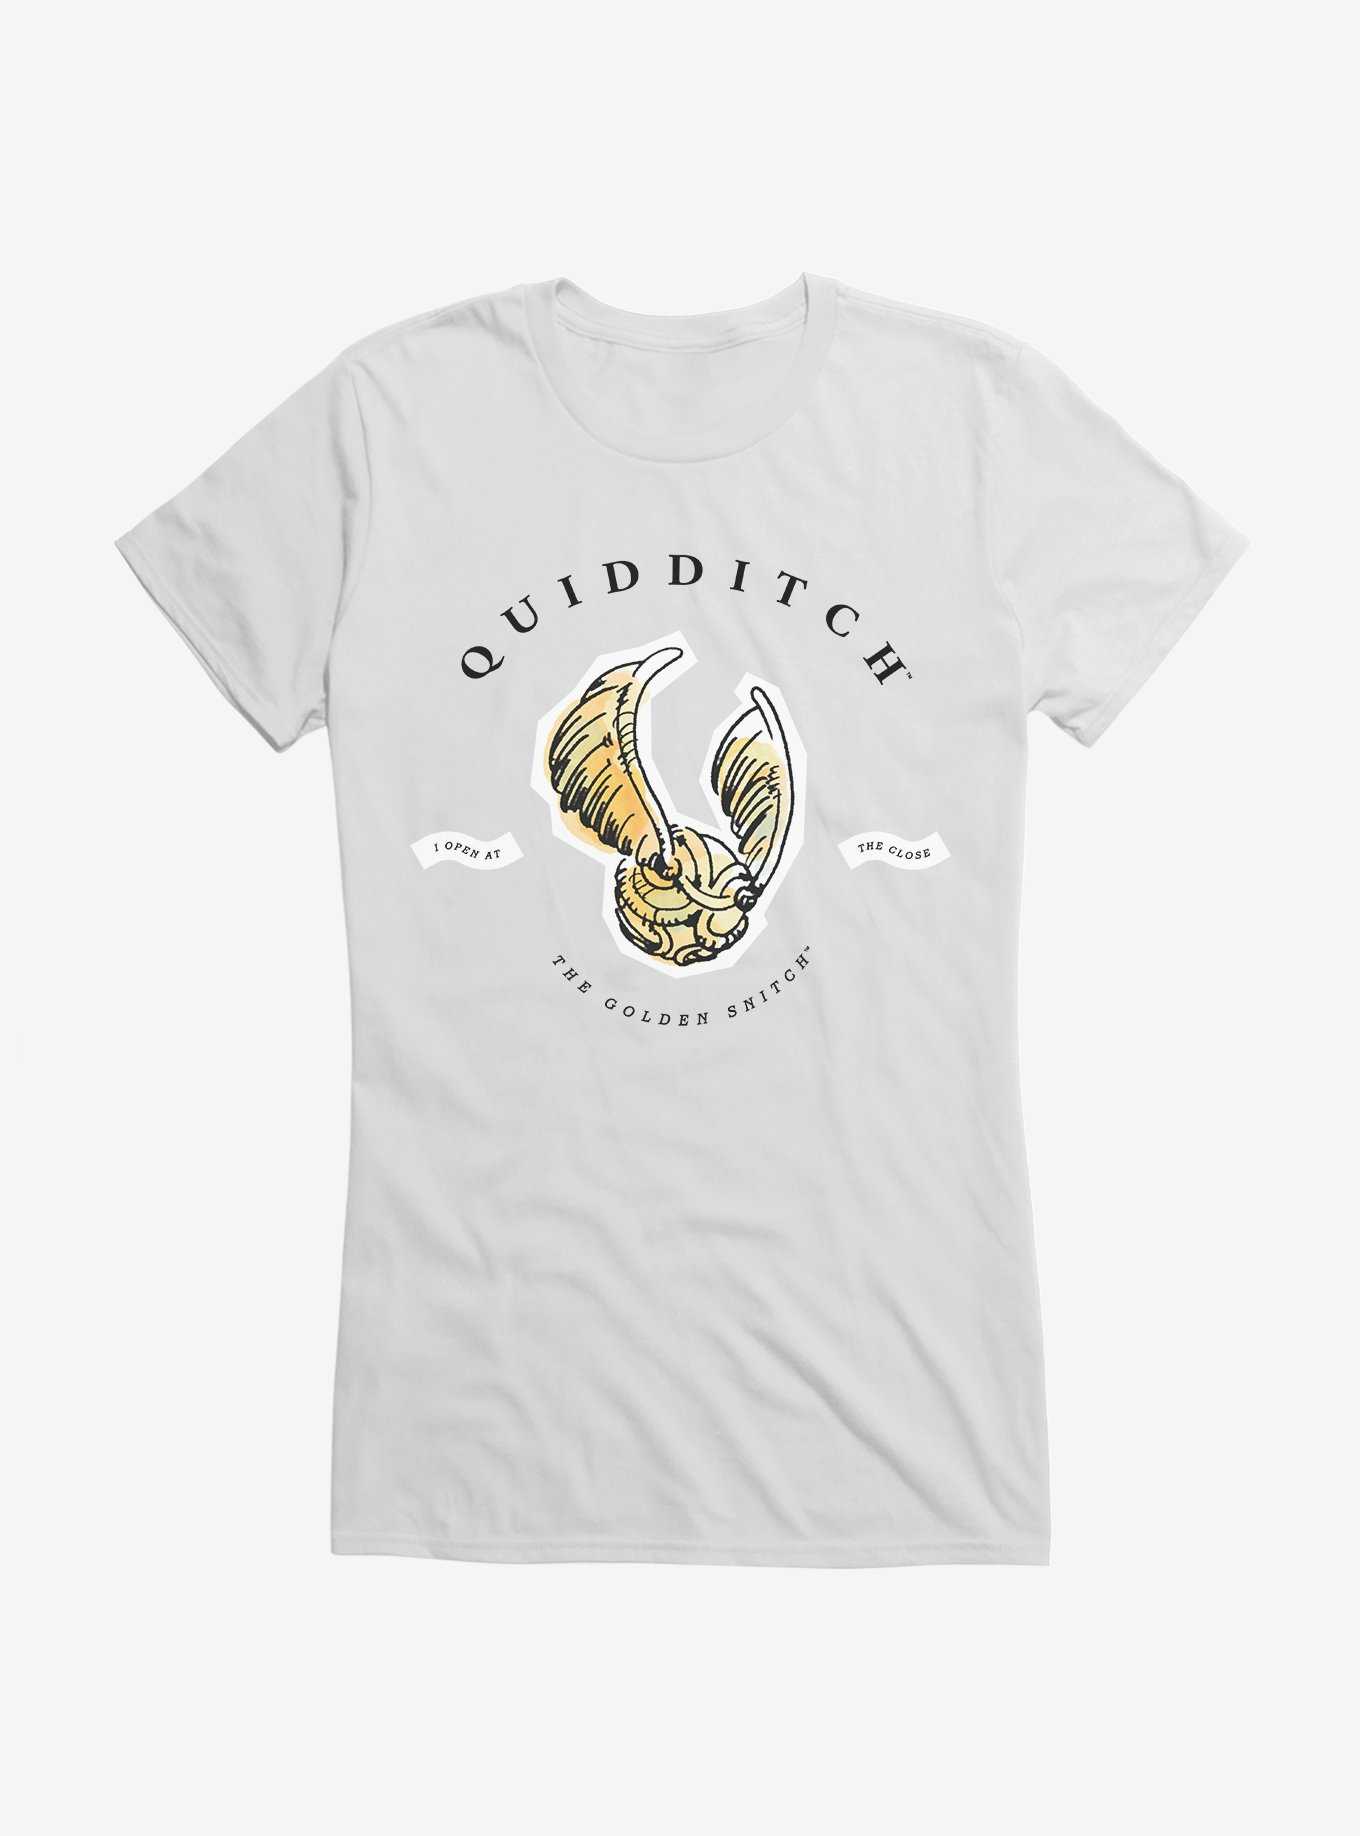 Golden OFFICIAL Snitch Potter Merch Topic Hot Harry & Shirts |